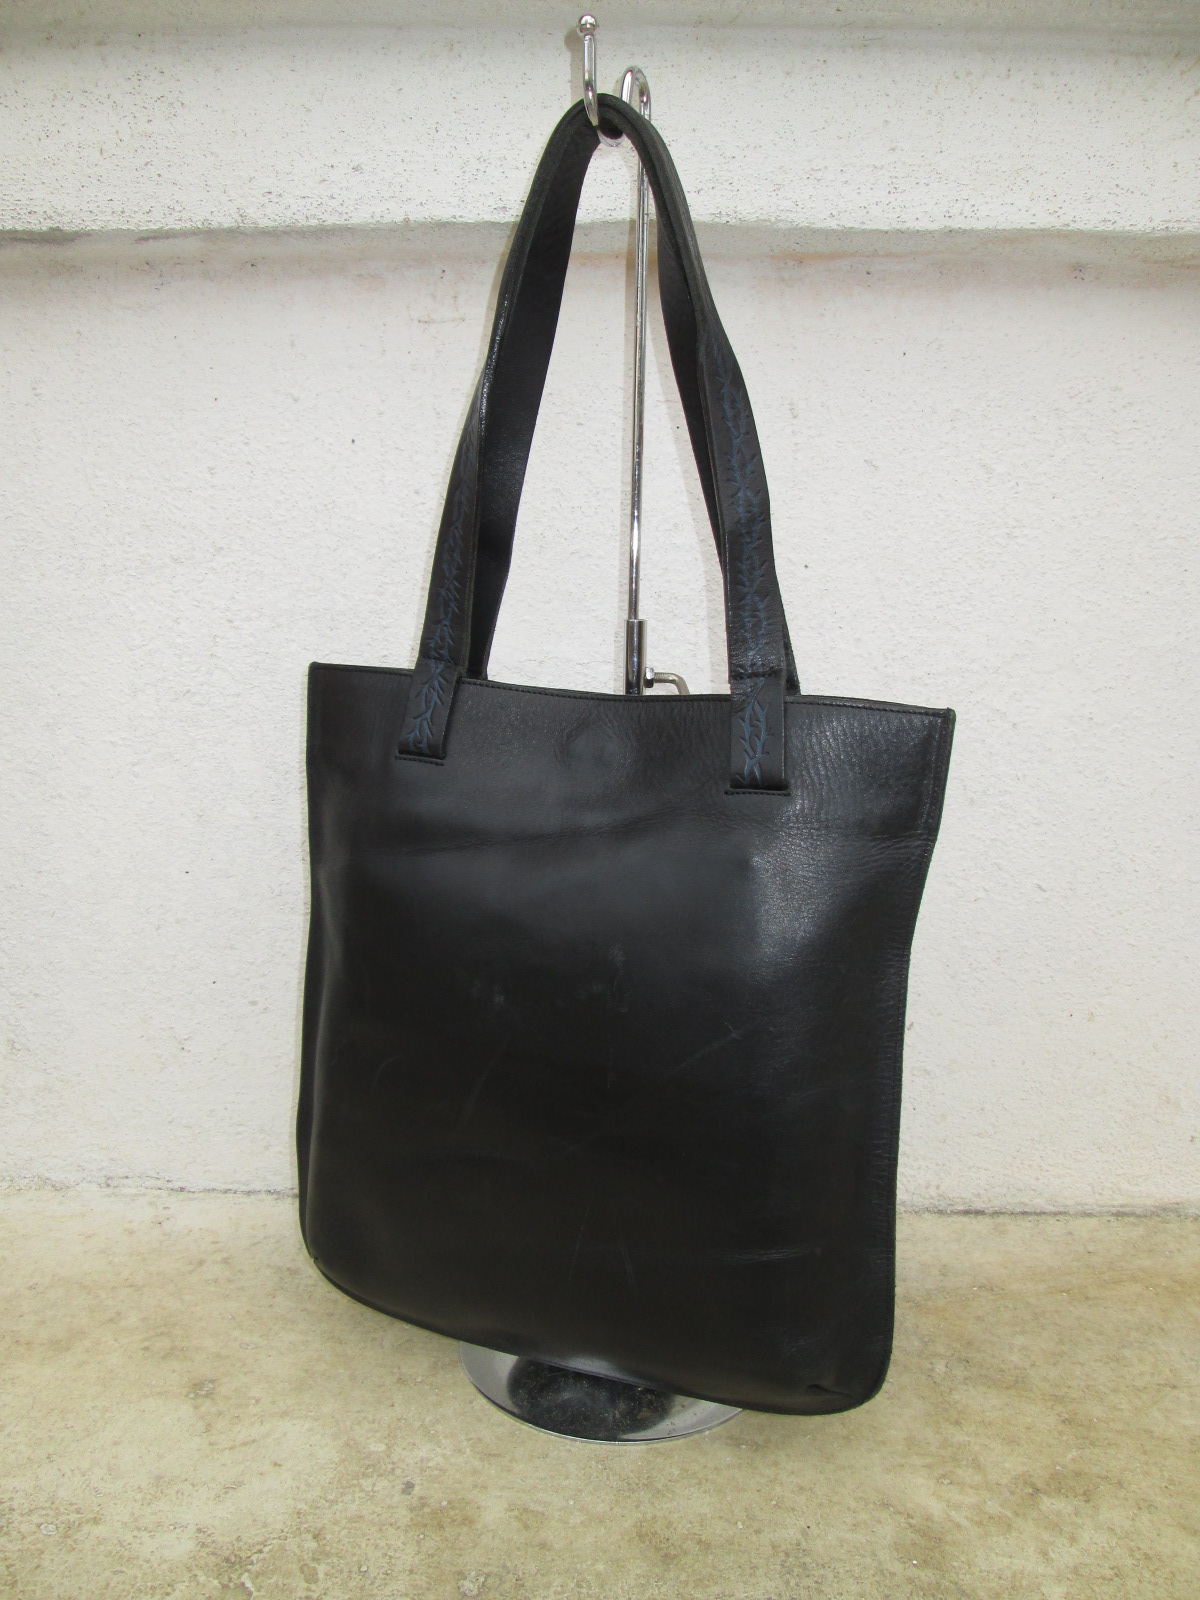 d0rayakEEbaG: Authentic Vtg Jean Paul Gaultier Dragon Leather Tote Bag ...